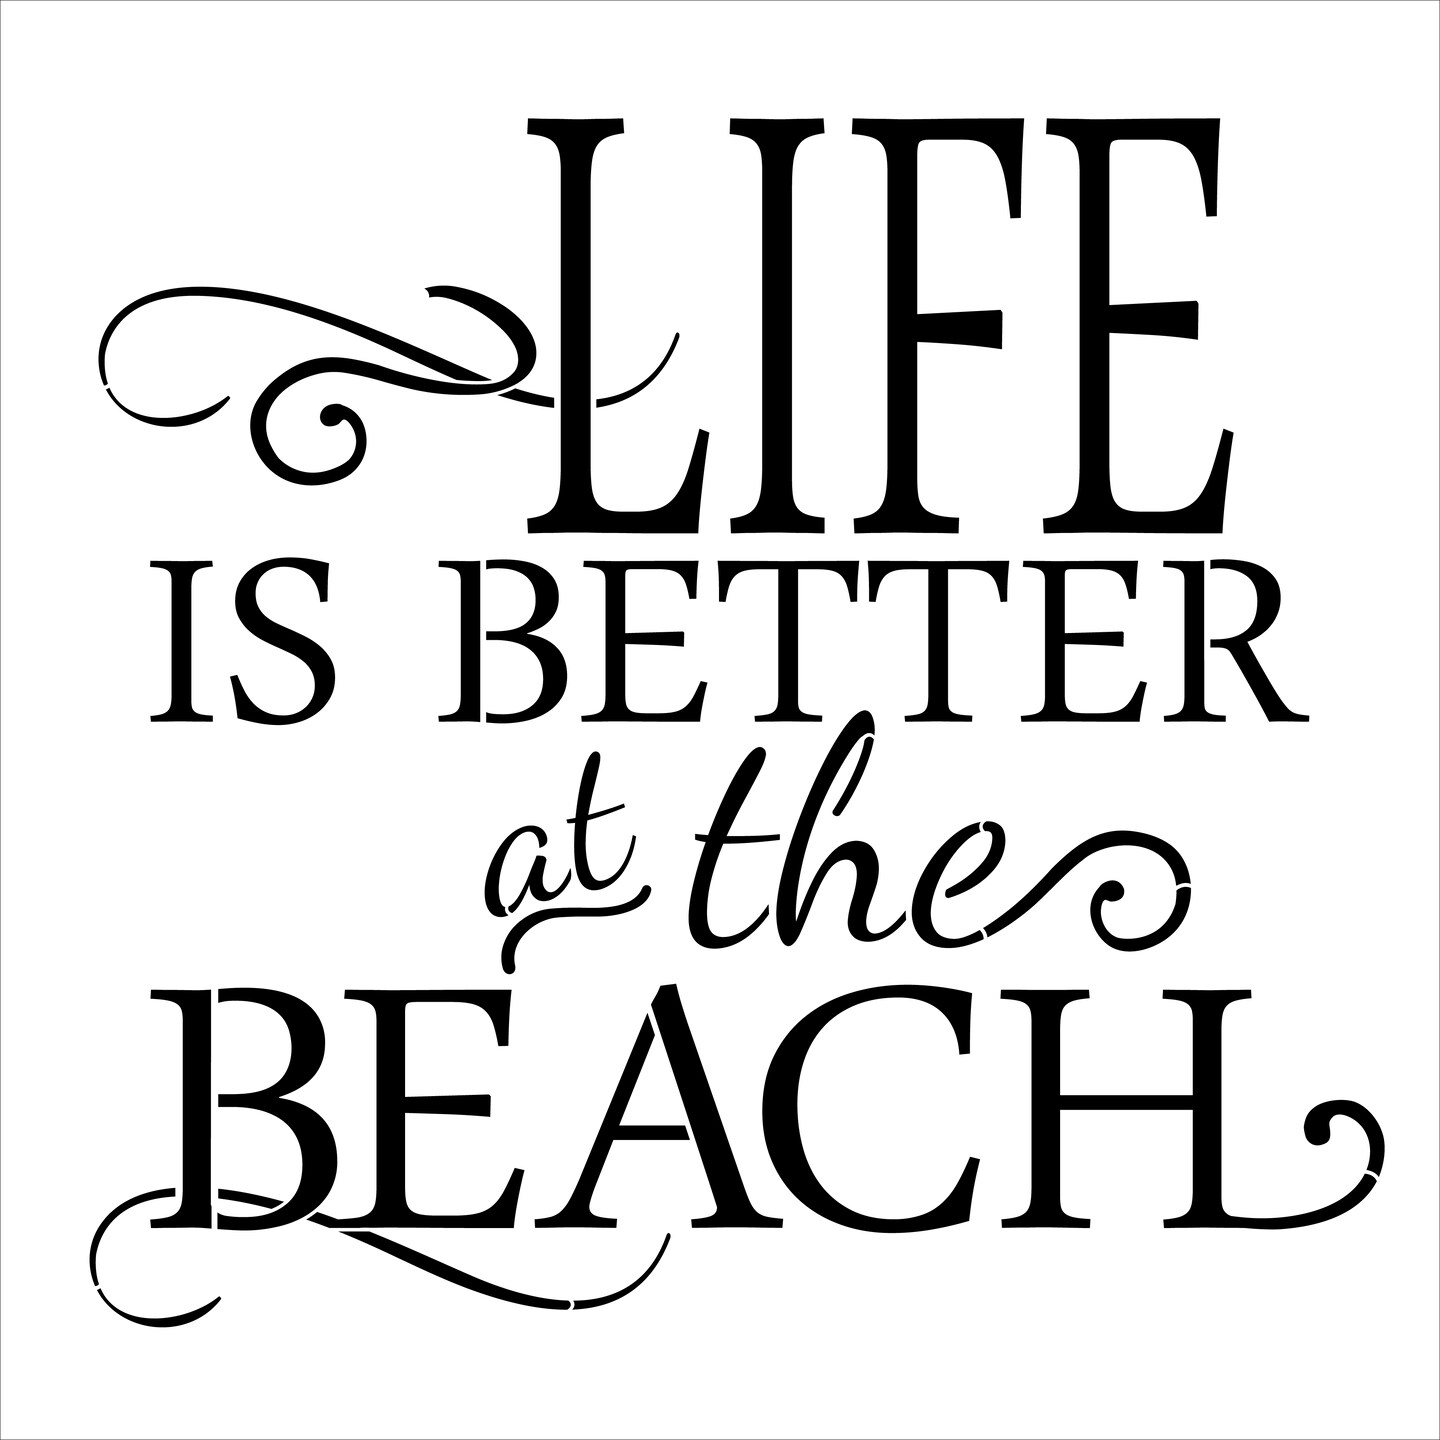 Life is Better at The Beach Embossing 12 x 12 Stencil | FS066 by Designer Stencils | Word &#x26; Phrase Stencils | Reusable Stencils for Painting on Wood, Wall, Tile, Canvas, Paper, Fabric, Furniture, Floor | Stencil for Home Makeover